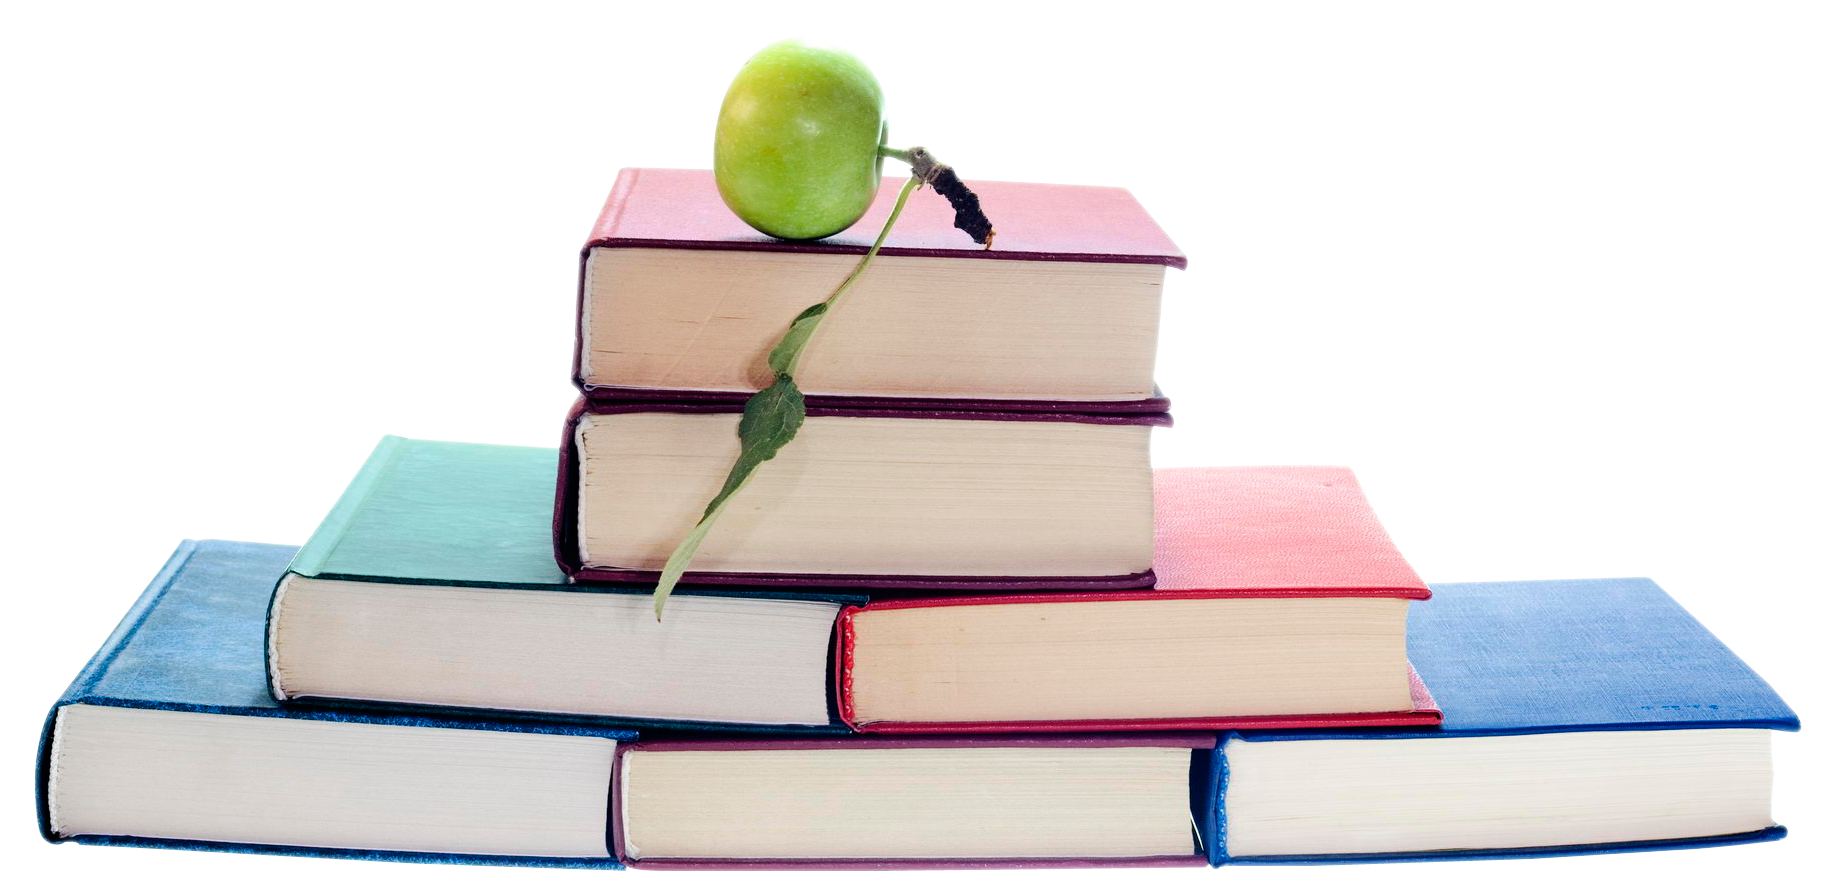 Stackof Bookswith Appleon Top PNG